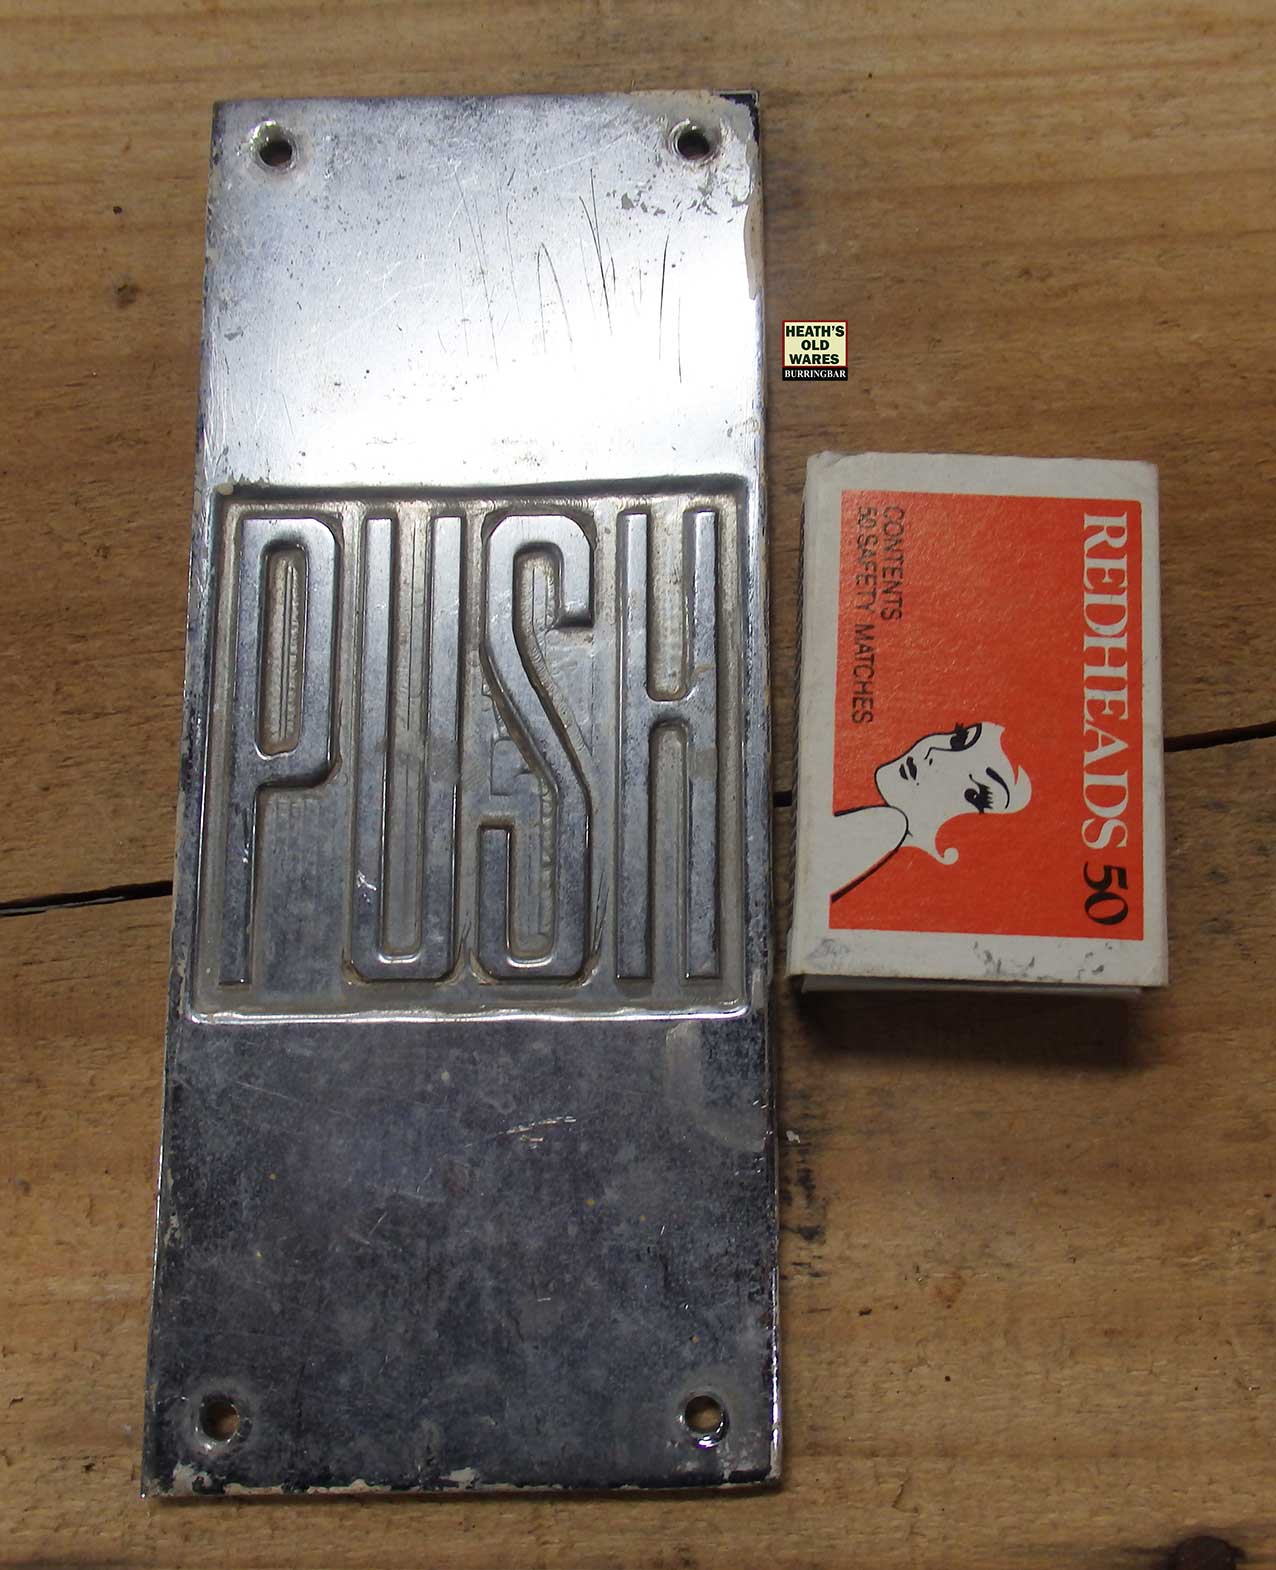 Retro chromeplated push plate  for sale at Heaths Old Wares, Collectables, Antiques & Industrial Antiques, 19-21 Broadway, Burringbar NSW 2483 Ph 0266771181 open 7 days